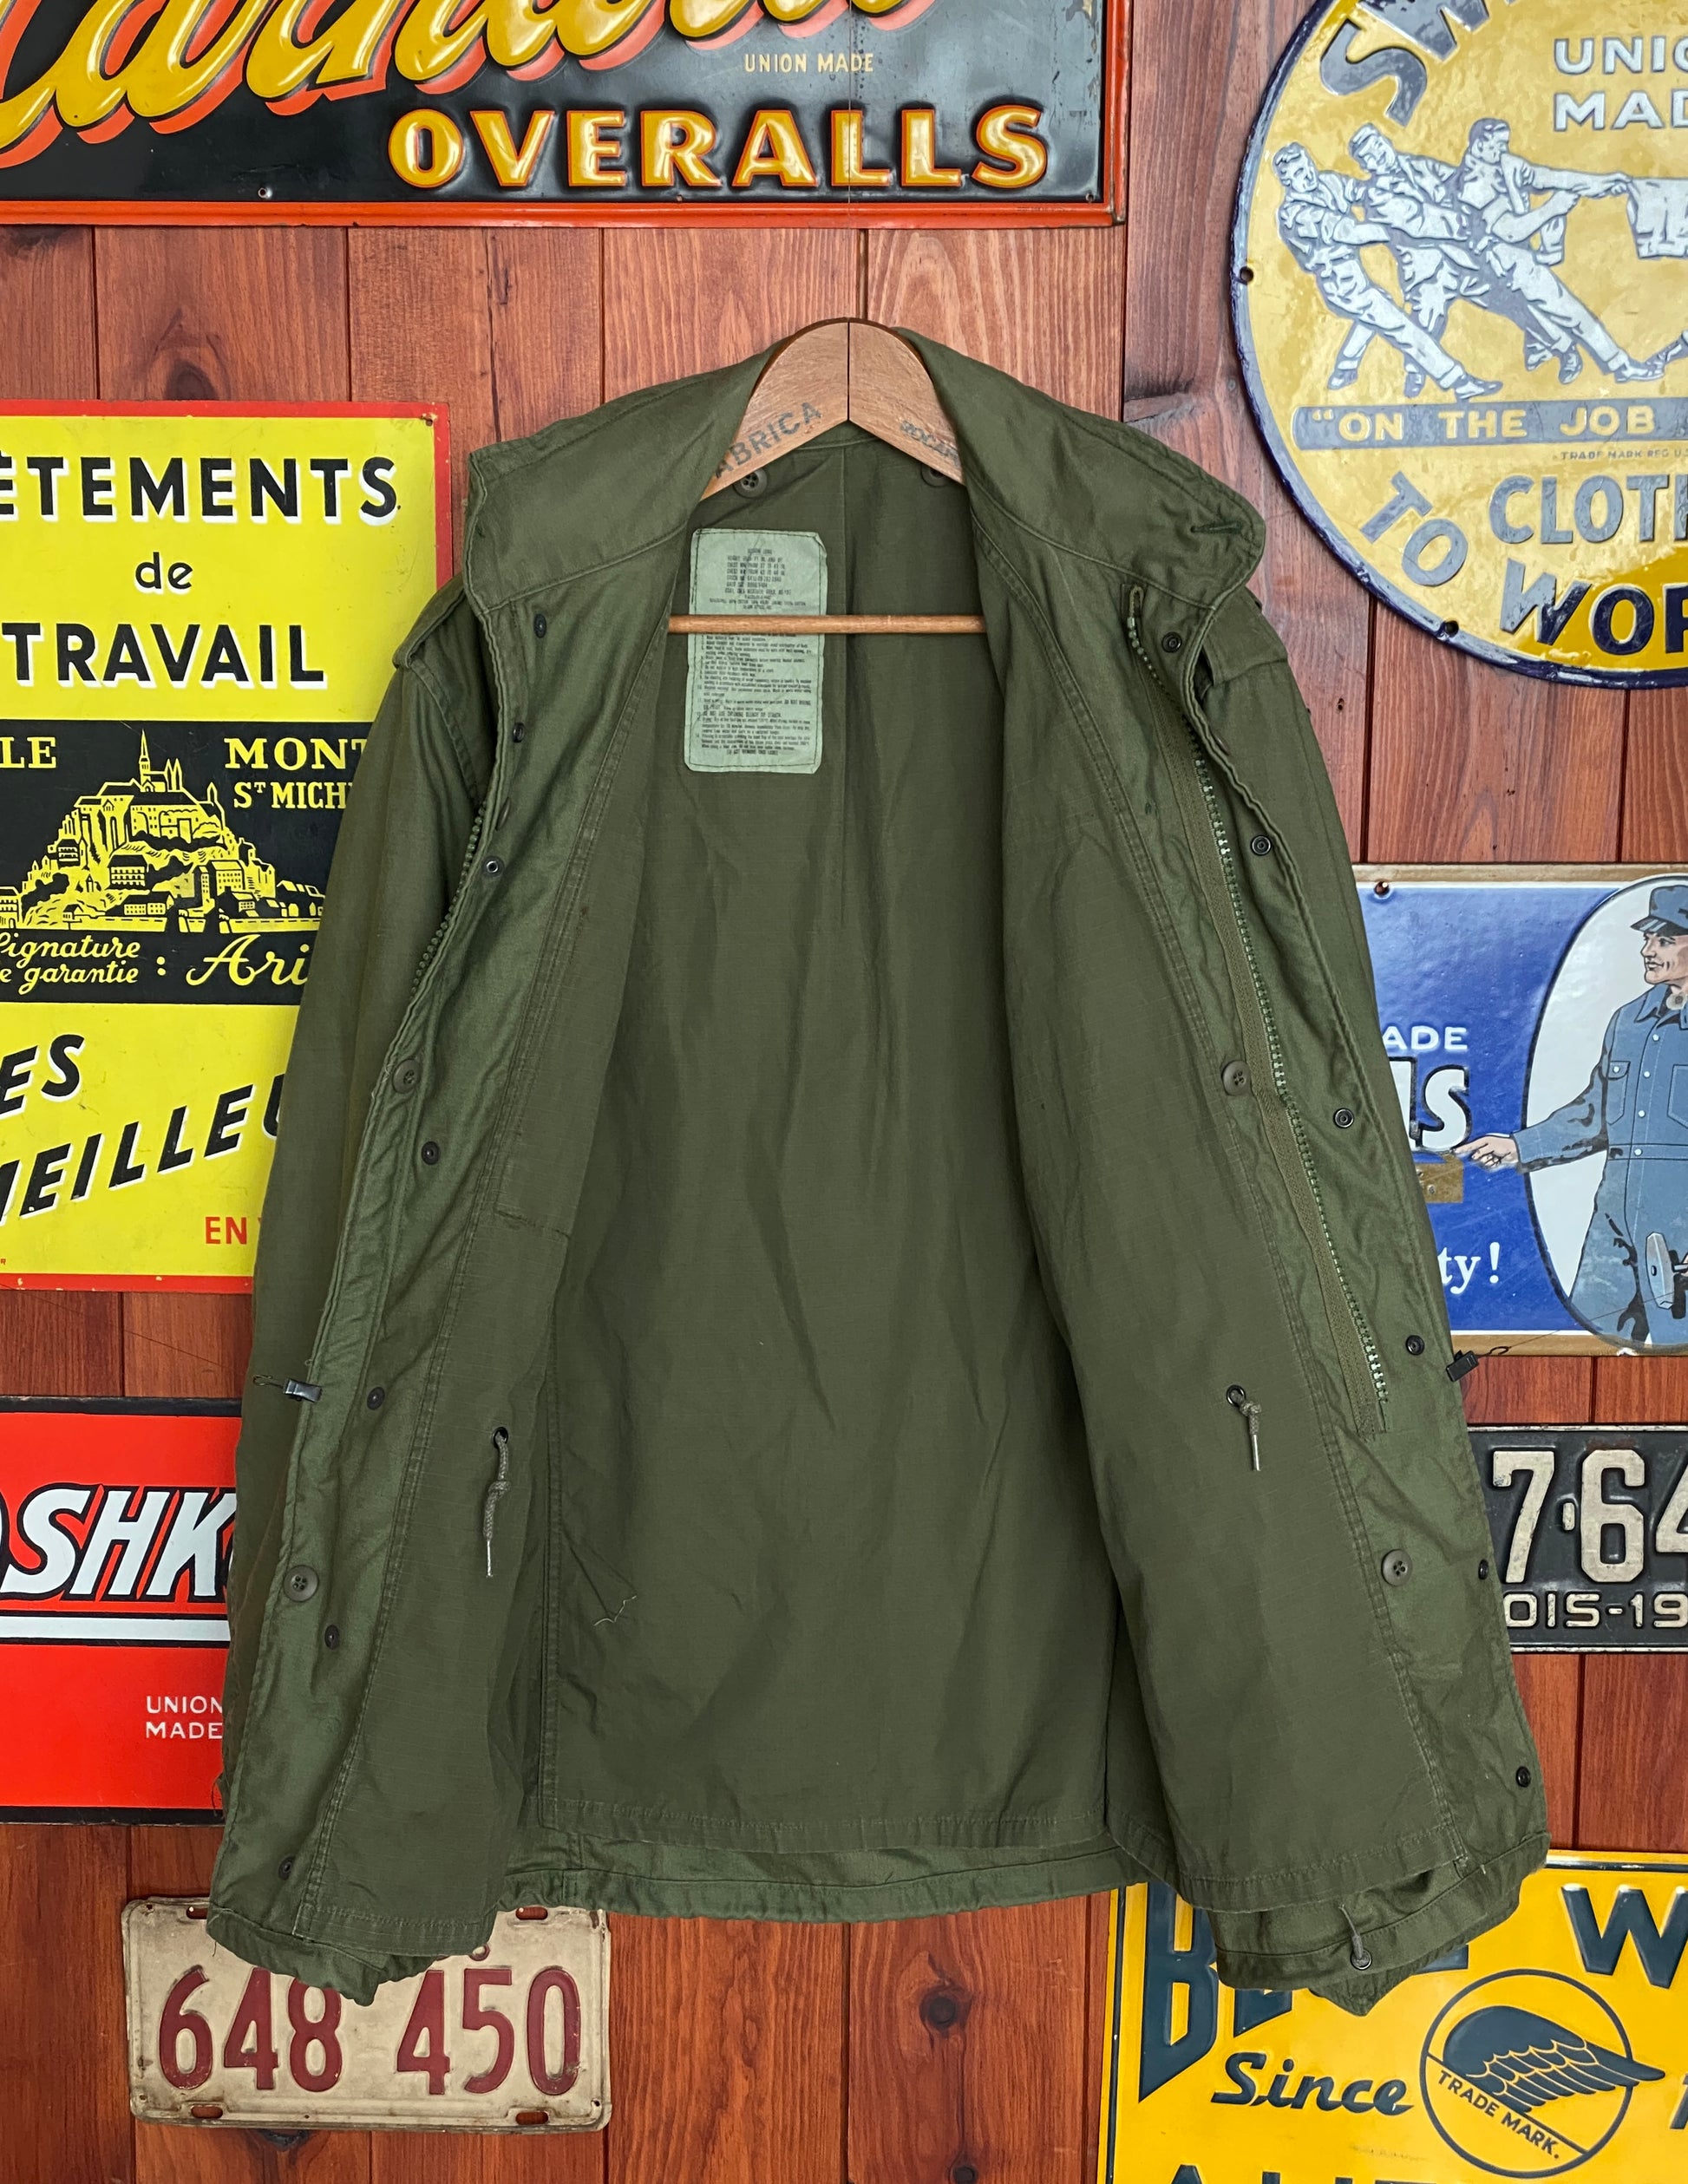 Authentic US Military 1986 Vintage M-65 Field Jacket: Classic Army Style, Timeless Quality